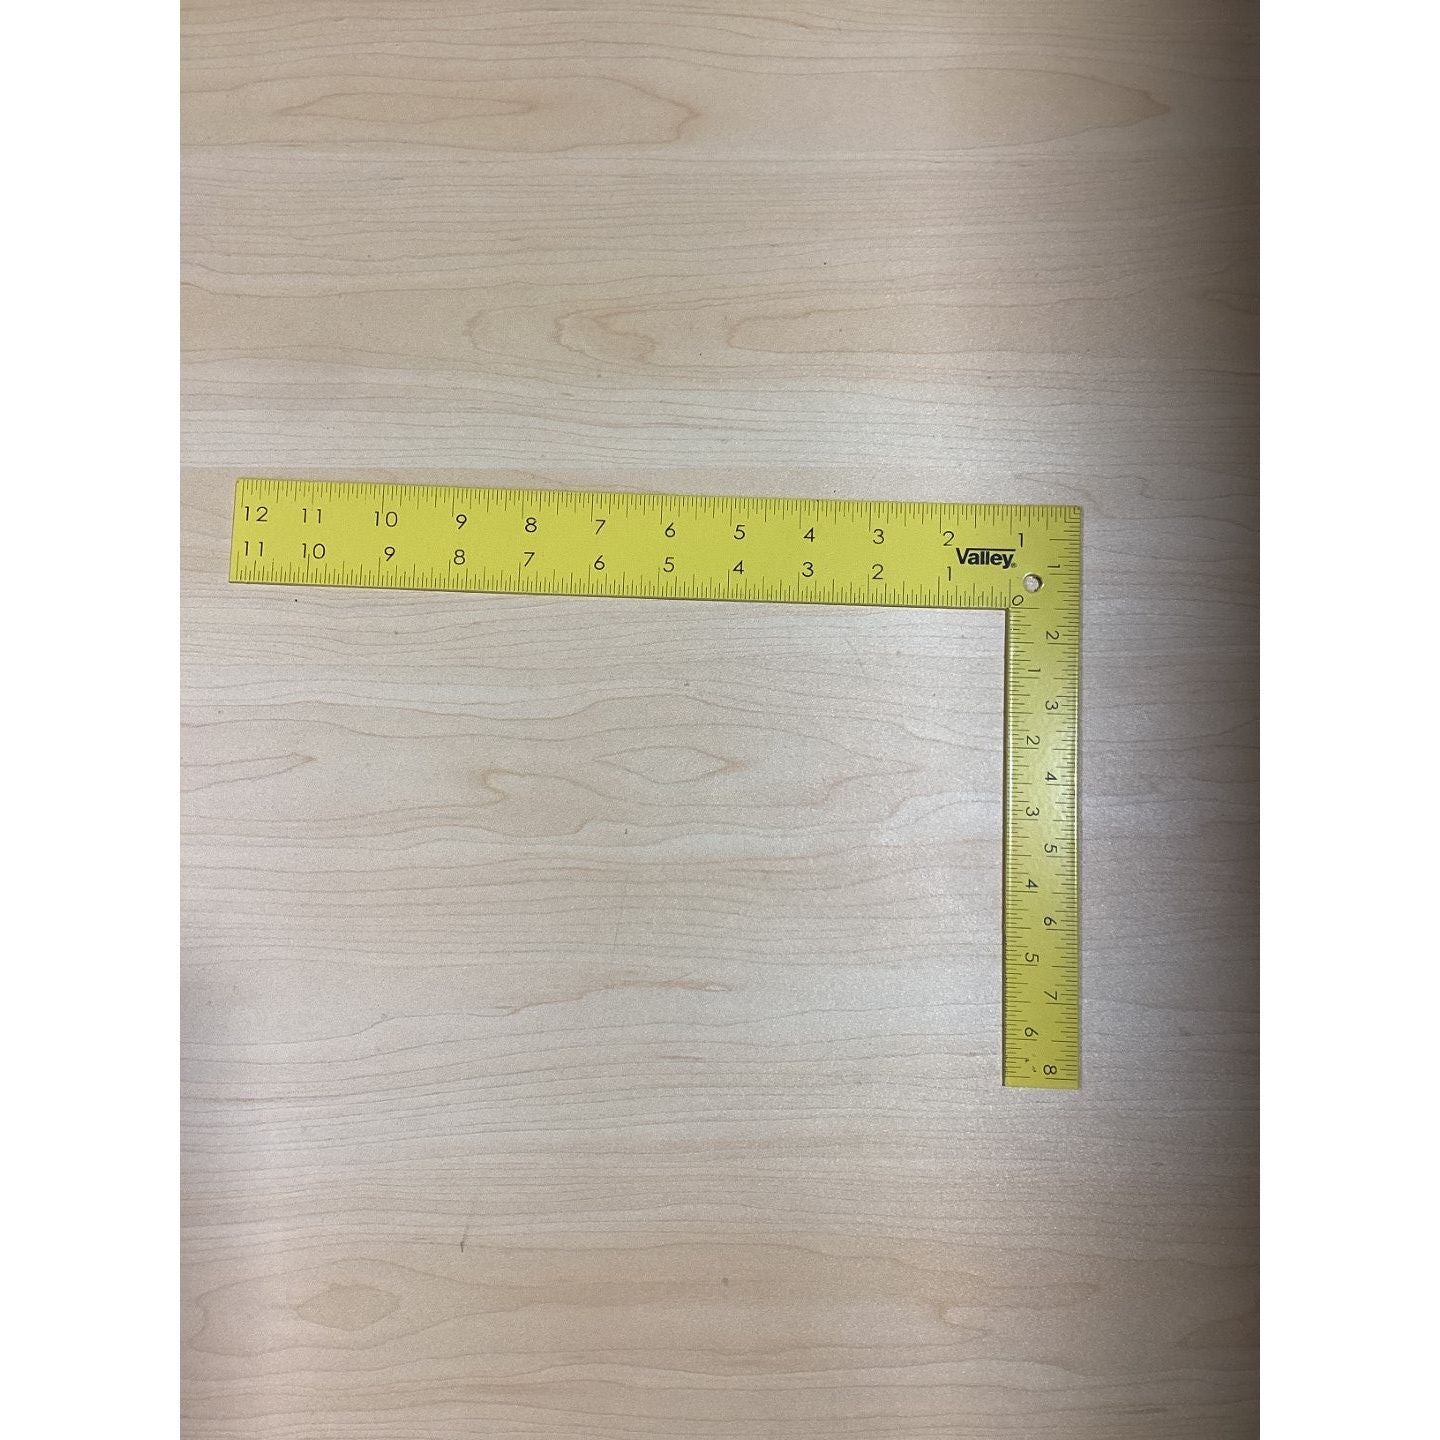 8 x 12 inch square ruler